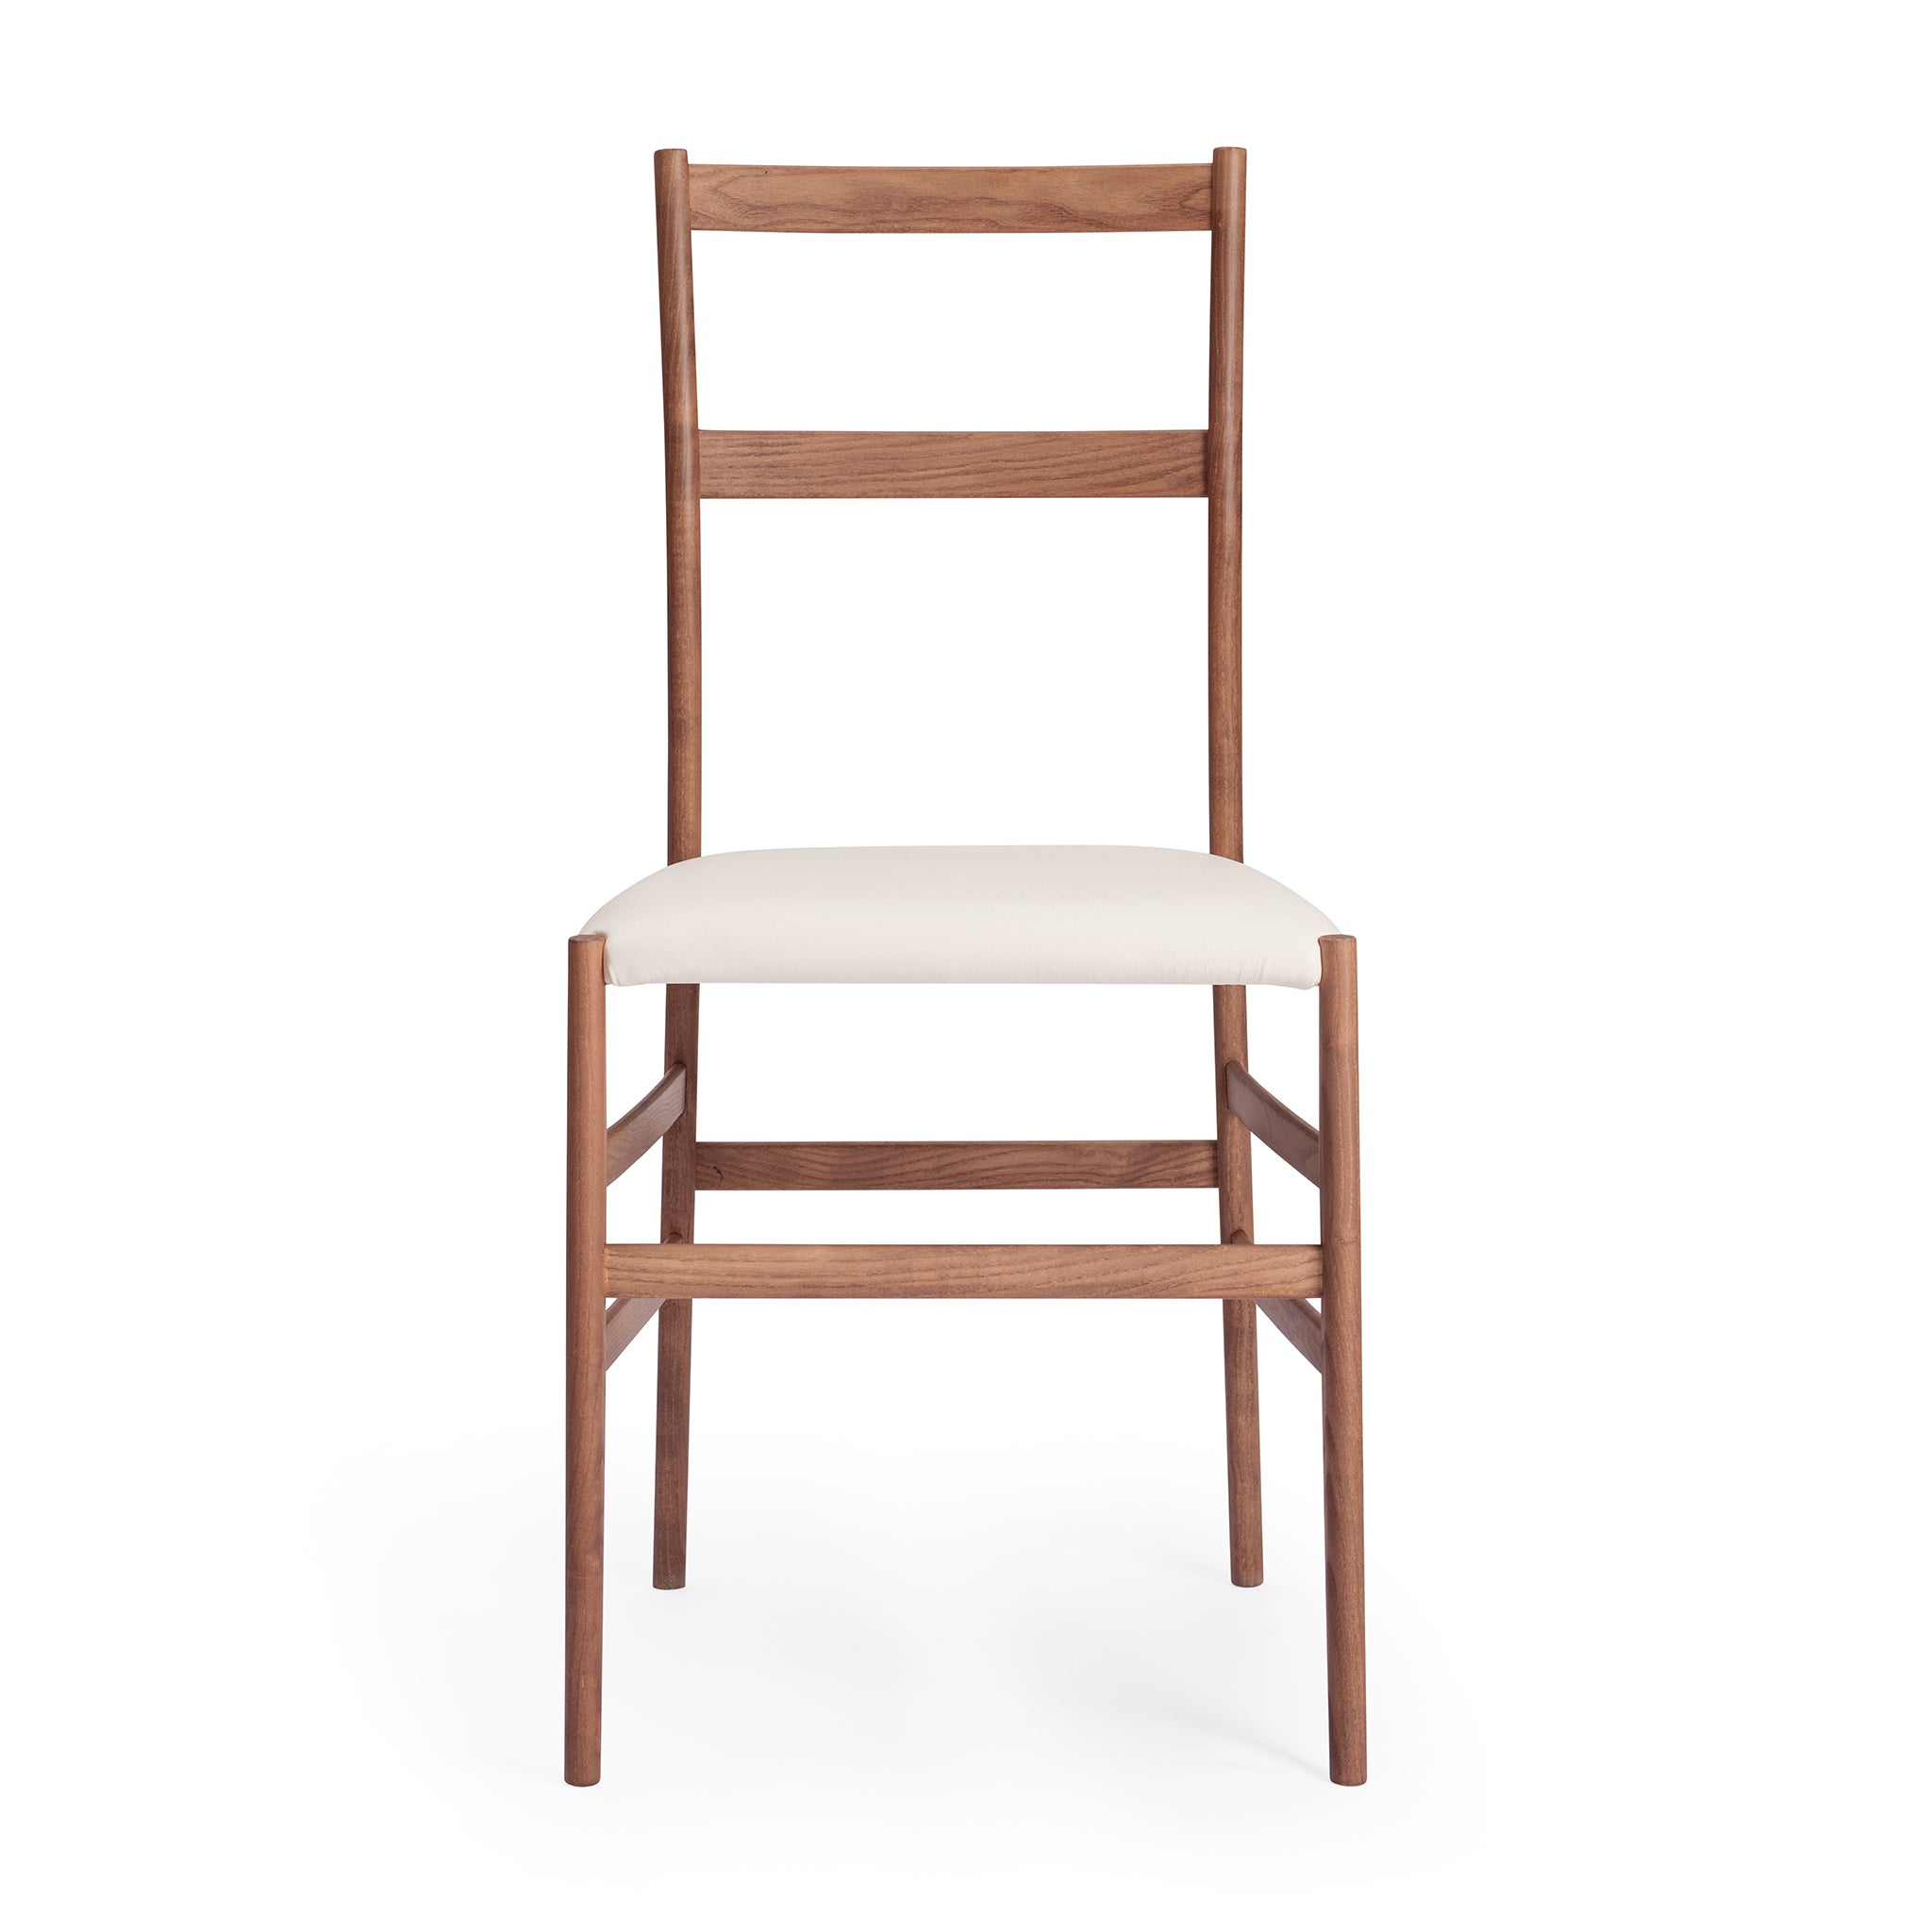 Front view of a Snella Modern Side Chair, american walnut frame, soft white leather seat, closely resembling the superleggera chair by Gio Ponti, ultra-lightweight at 5 lbs, contract grade. Manufactured by Klarel in Italy. #K42-5